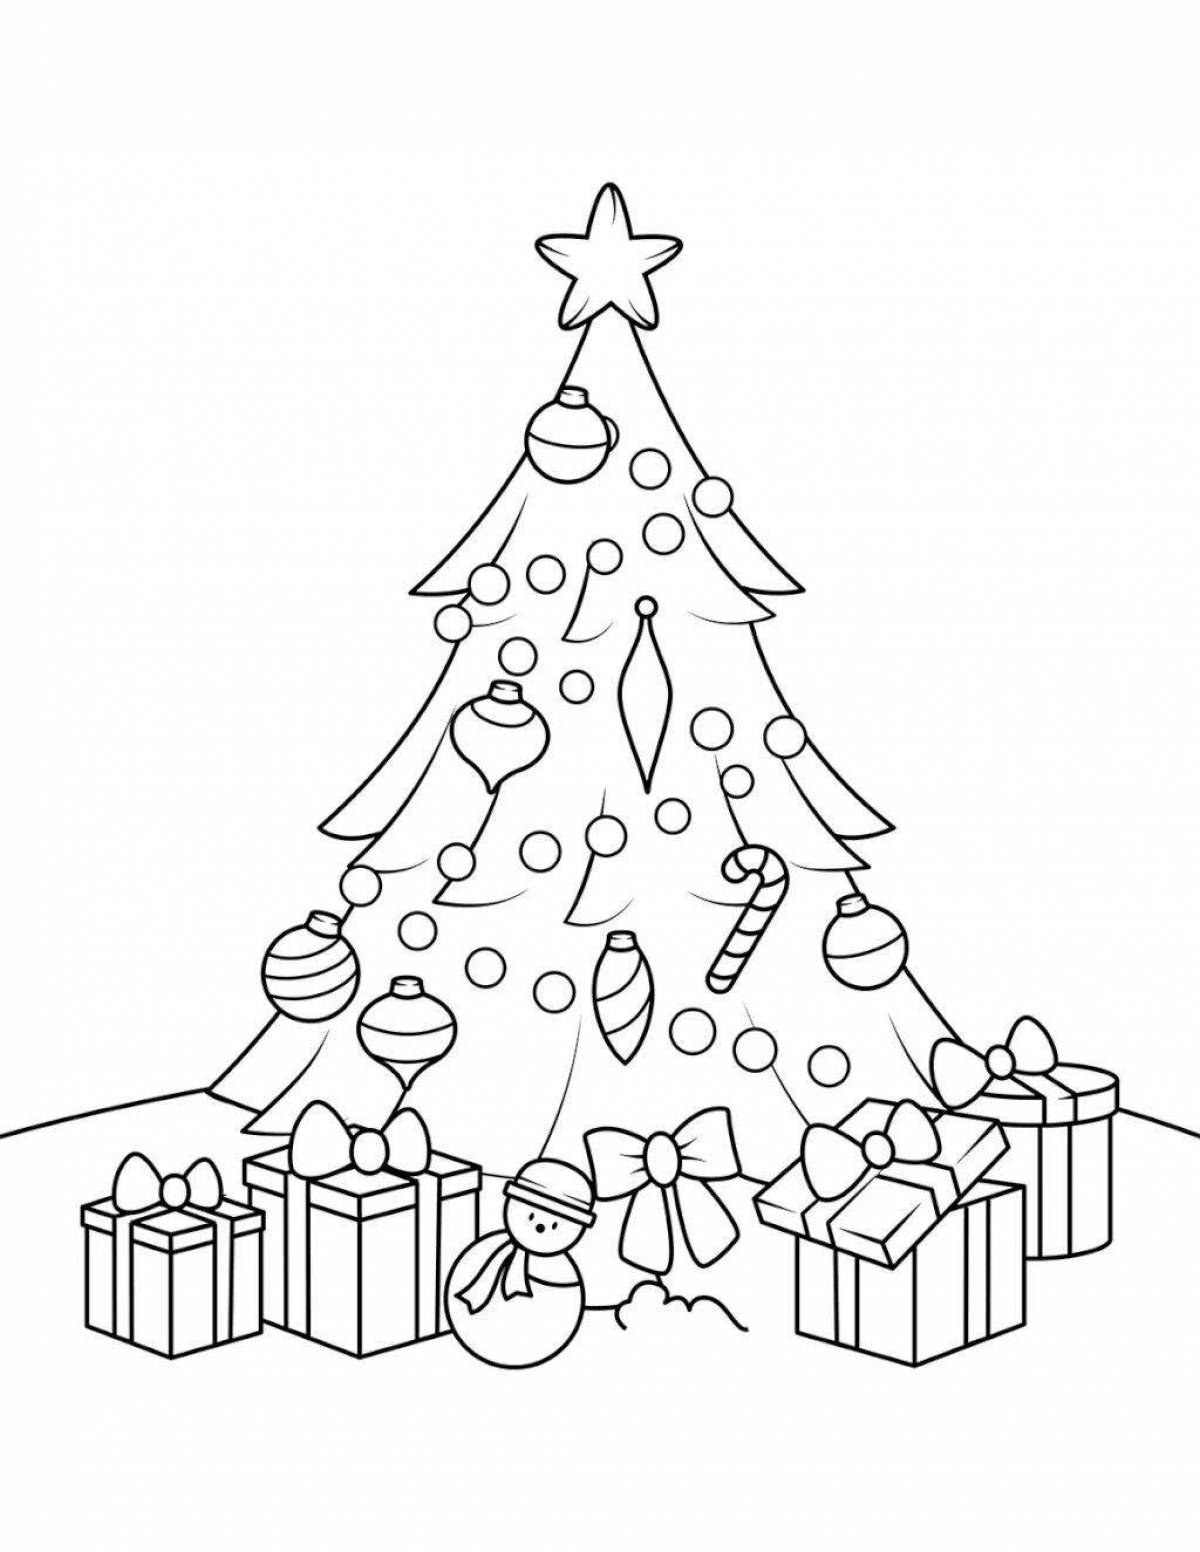 Christmas tree with gifts #7